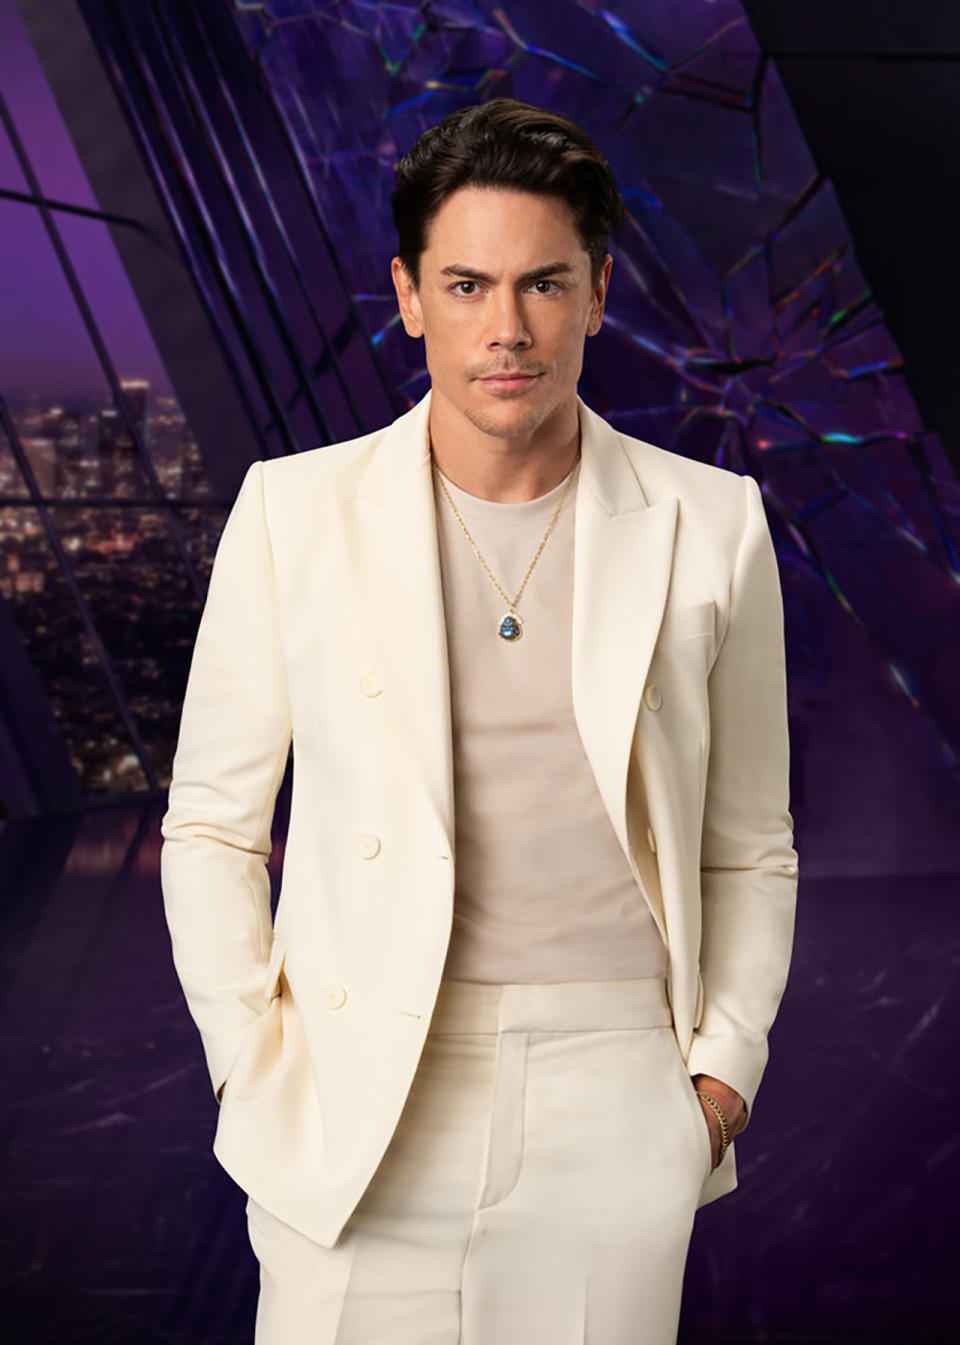 3. How much does Tom Sandoval make from Vanderpump Rules?